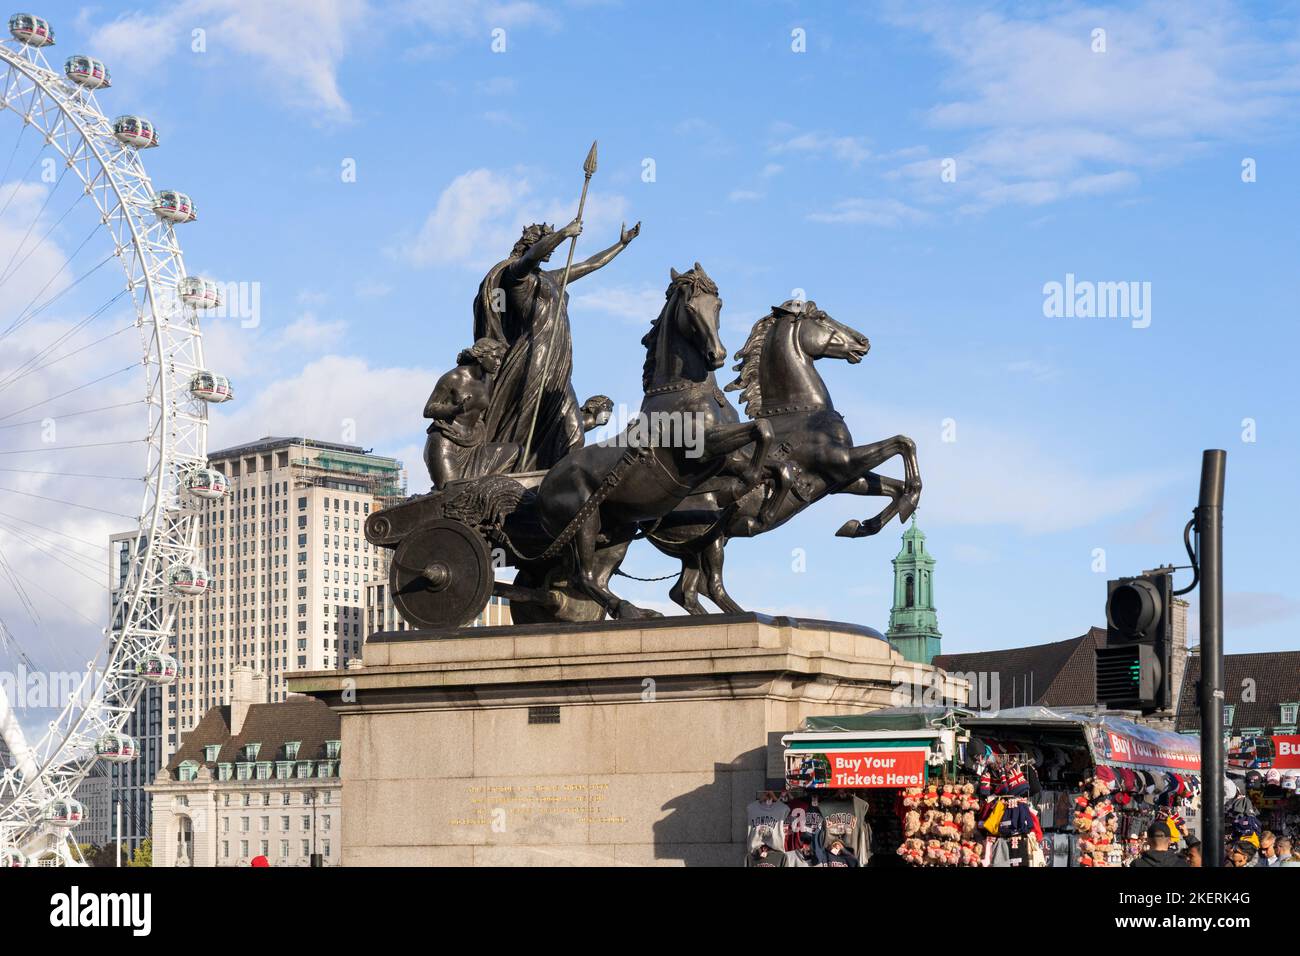 Dramatic bronze sculpture of the Celtic queen Boudicca & her daughters riding a horse drawn chariot, by Thomas Thornycroft. Outside Parliament, London Stock Photo